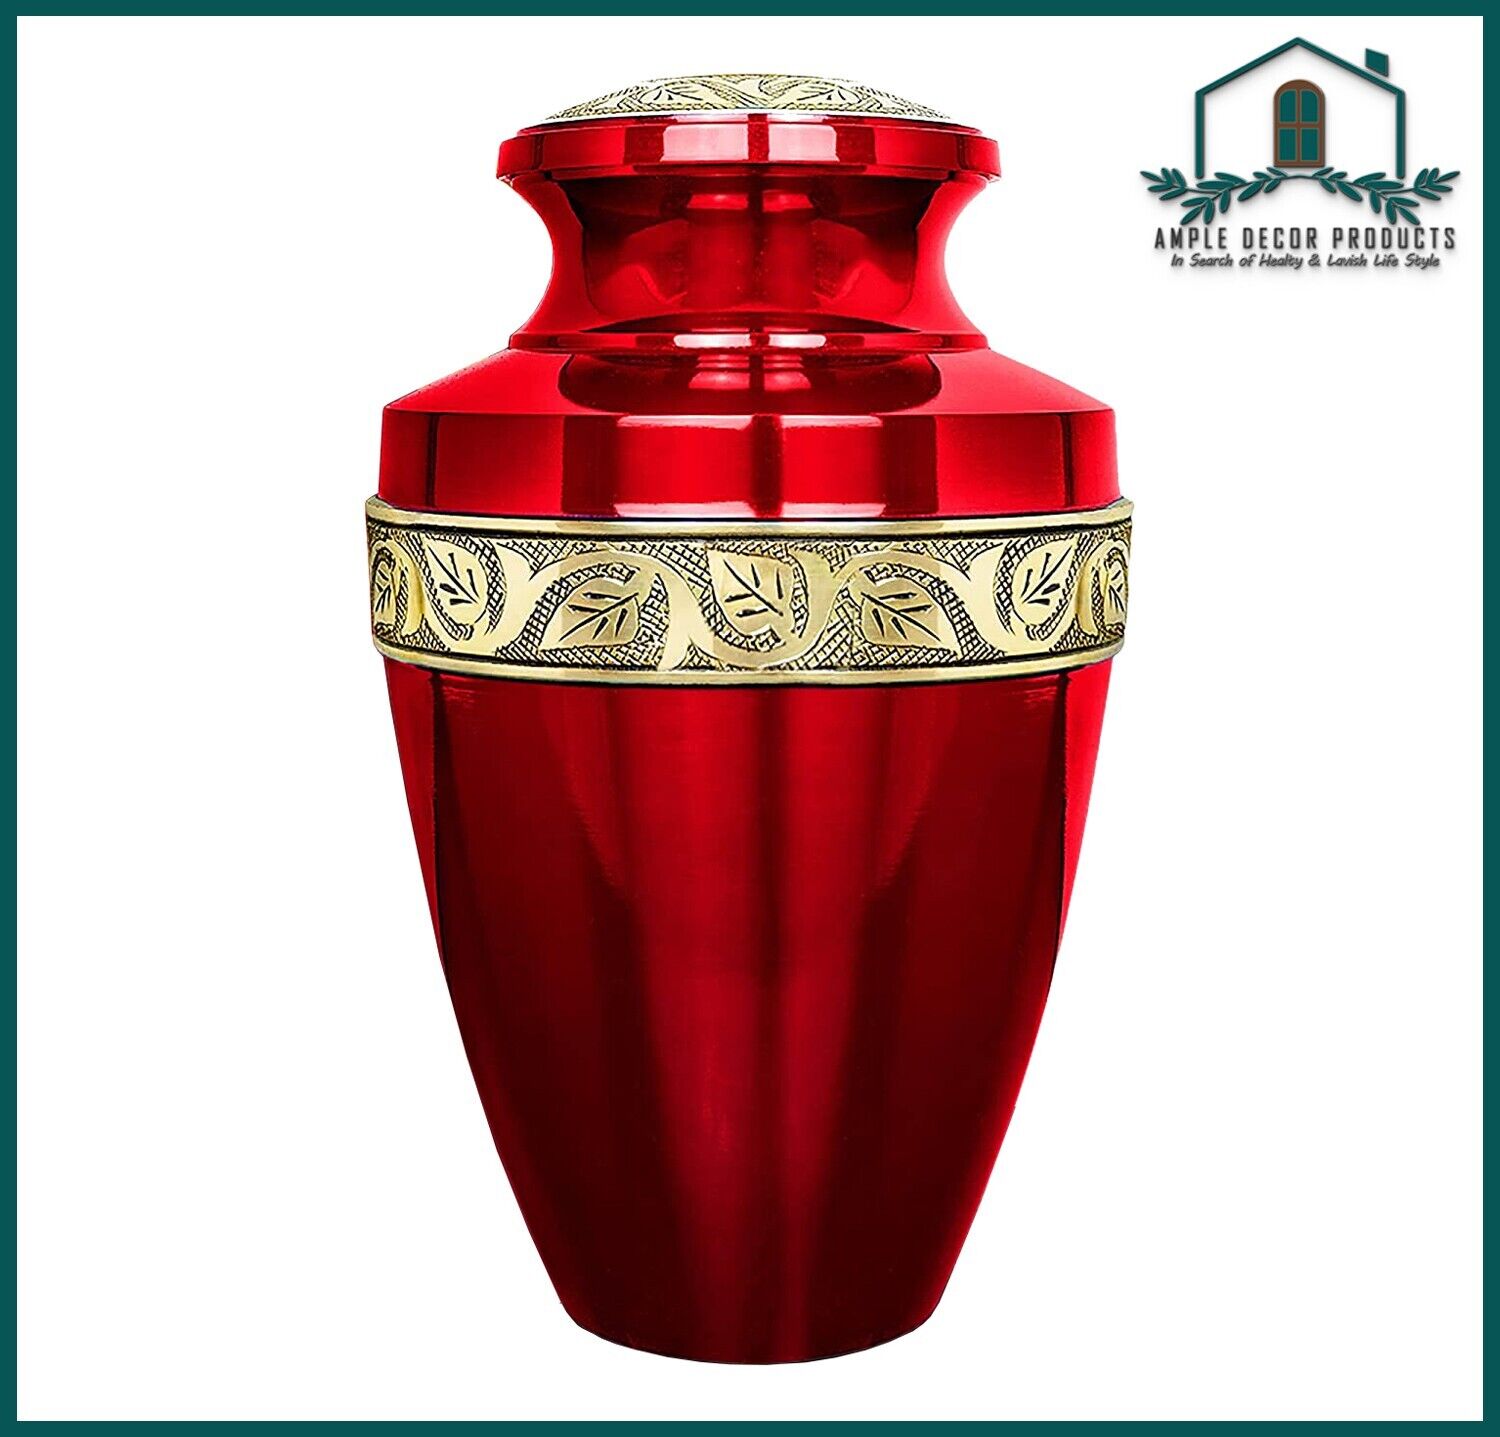 Brass Cremation Urns for Human Ashes Elegant Decorative Urns Large Size 300 lbs.